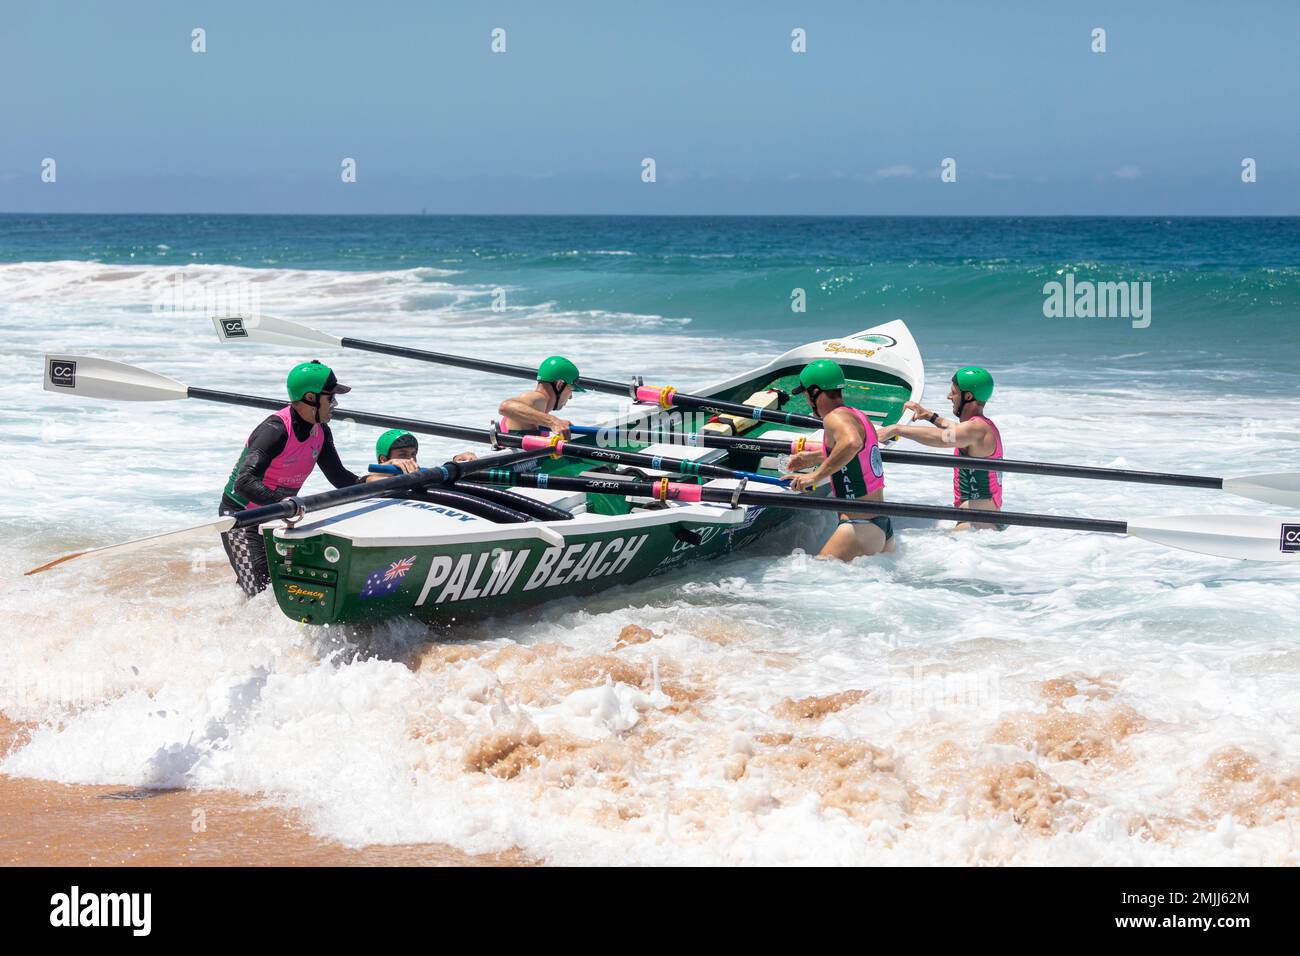 Palm Beach Sydney, traditional surfboat racing on Narrabeen Beach, Palm Beach mens team prepares for next carnival heat, surfboat premiership Aus Stock Photo